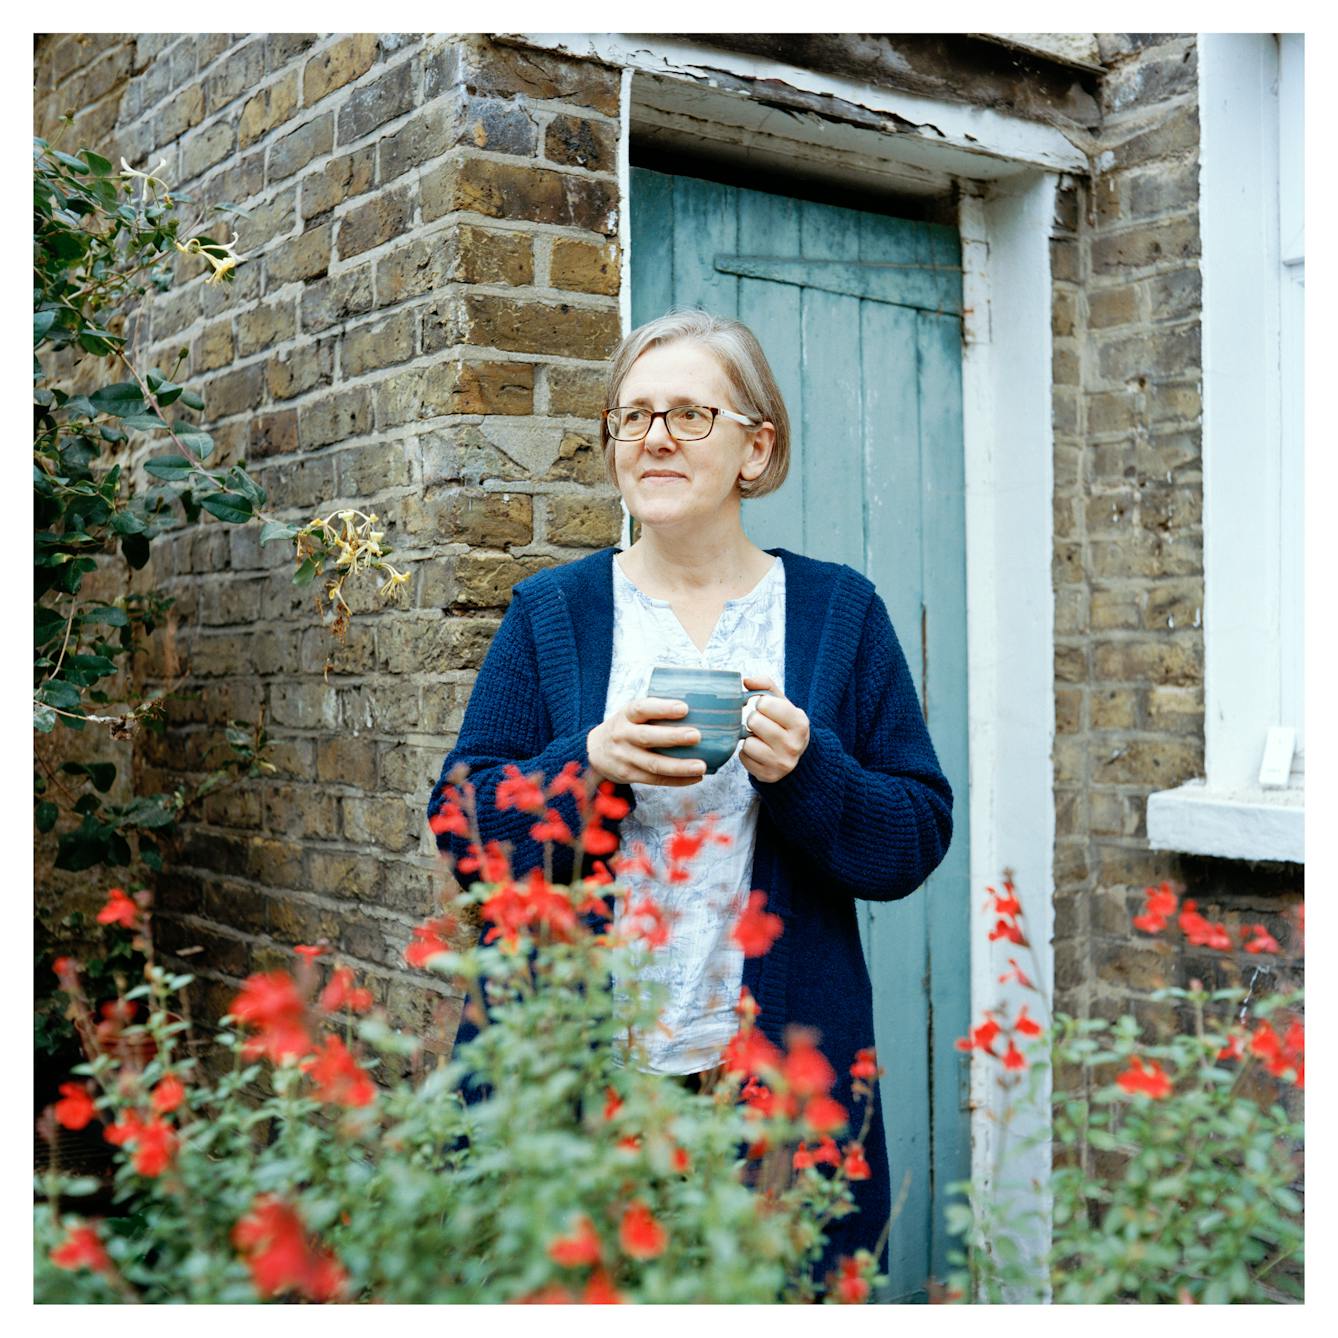 Portrait photograph of Emily, a woman with short grey hair wearing glasses. She is wearing a patterned top and a long blue cardigan and is holding a mug with both hands. 

She is standing in front of a brick building with a blue painted wooden door. She is looking into the distance and in front of her are some red wildflowers. 